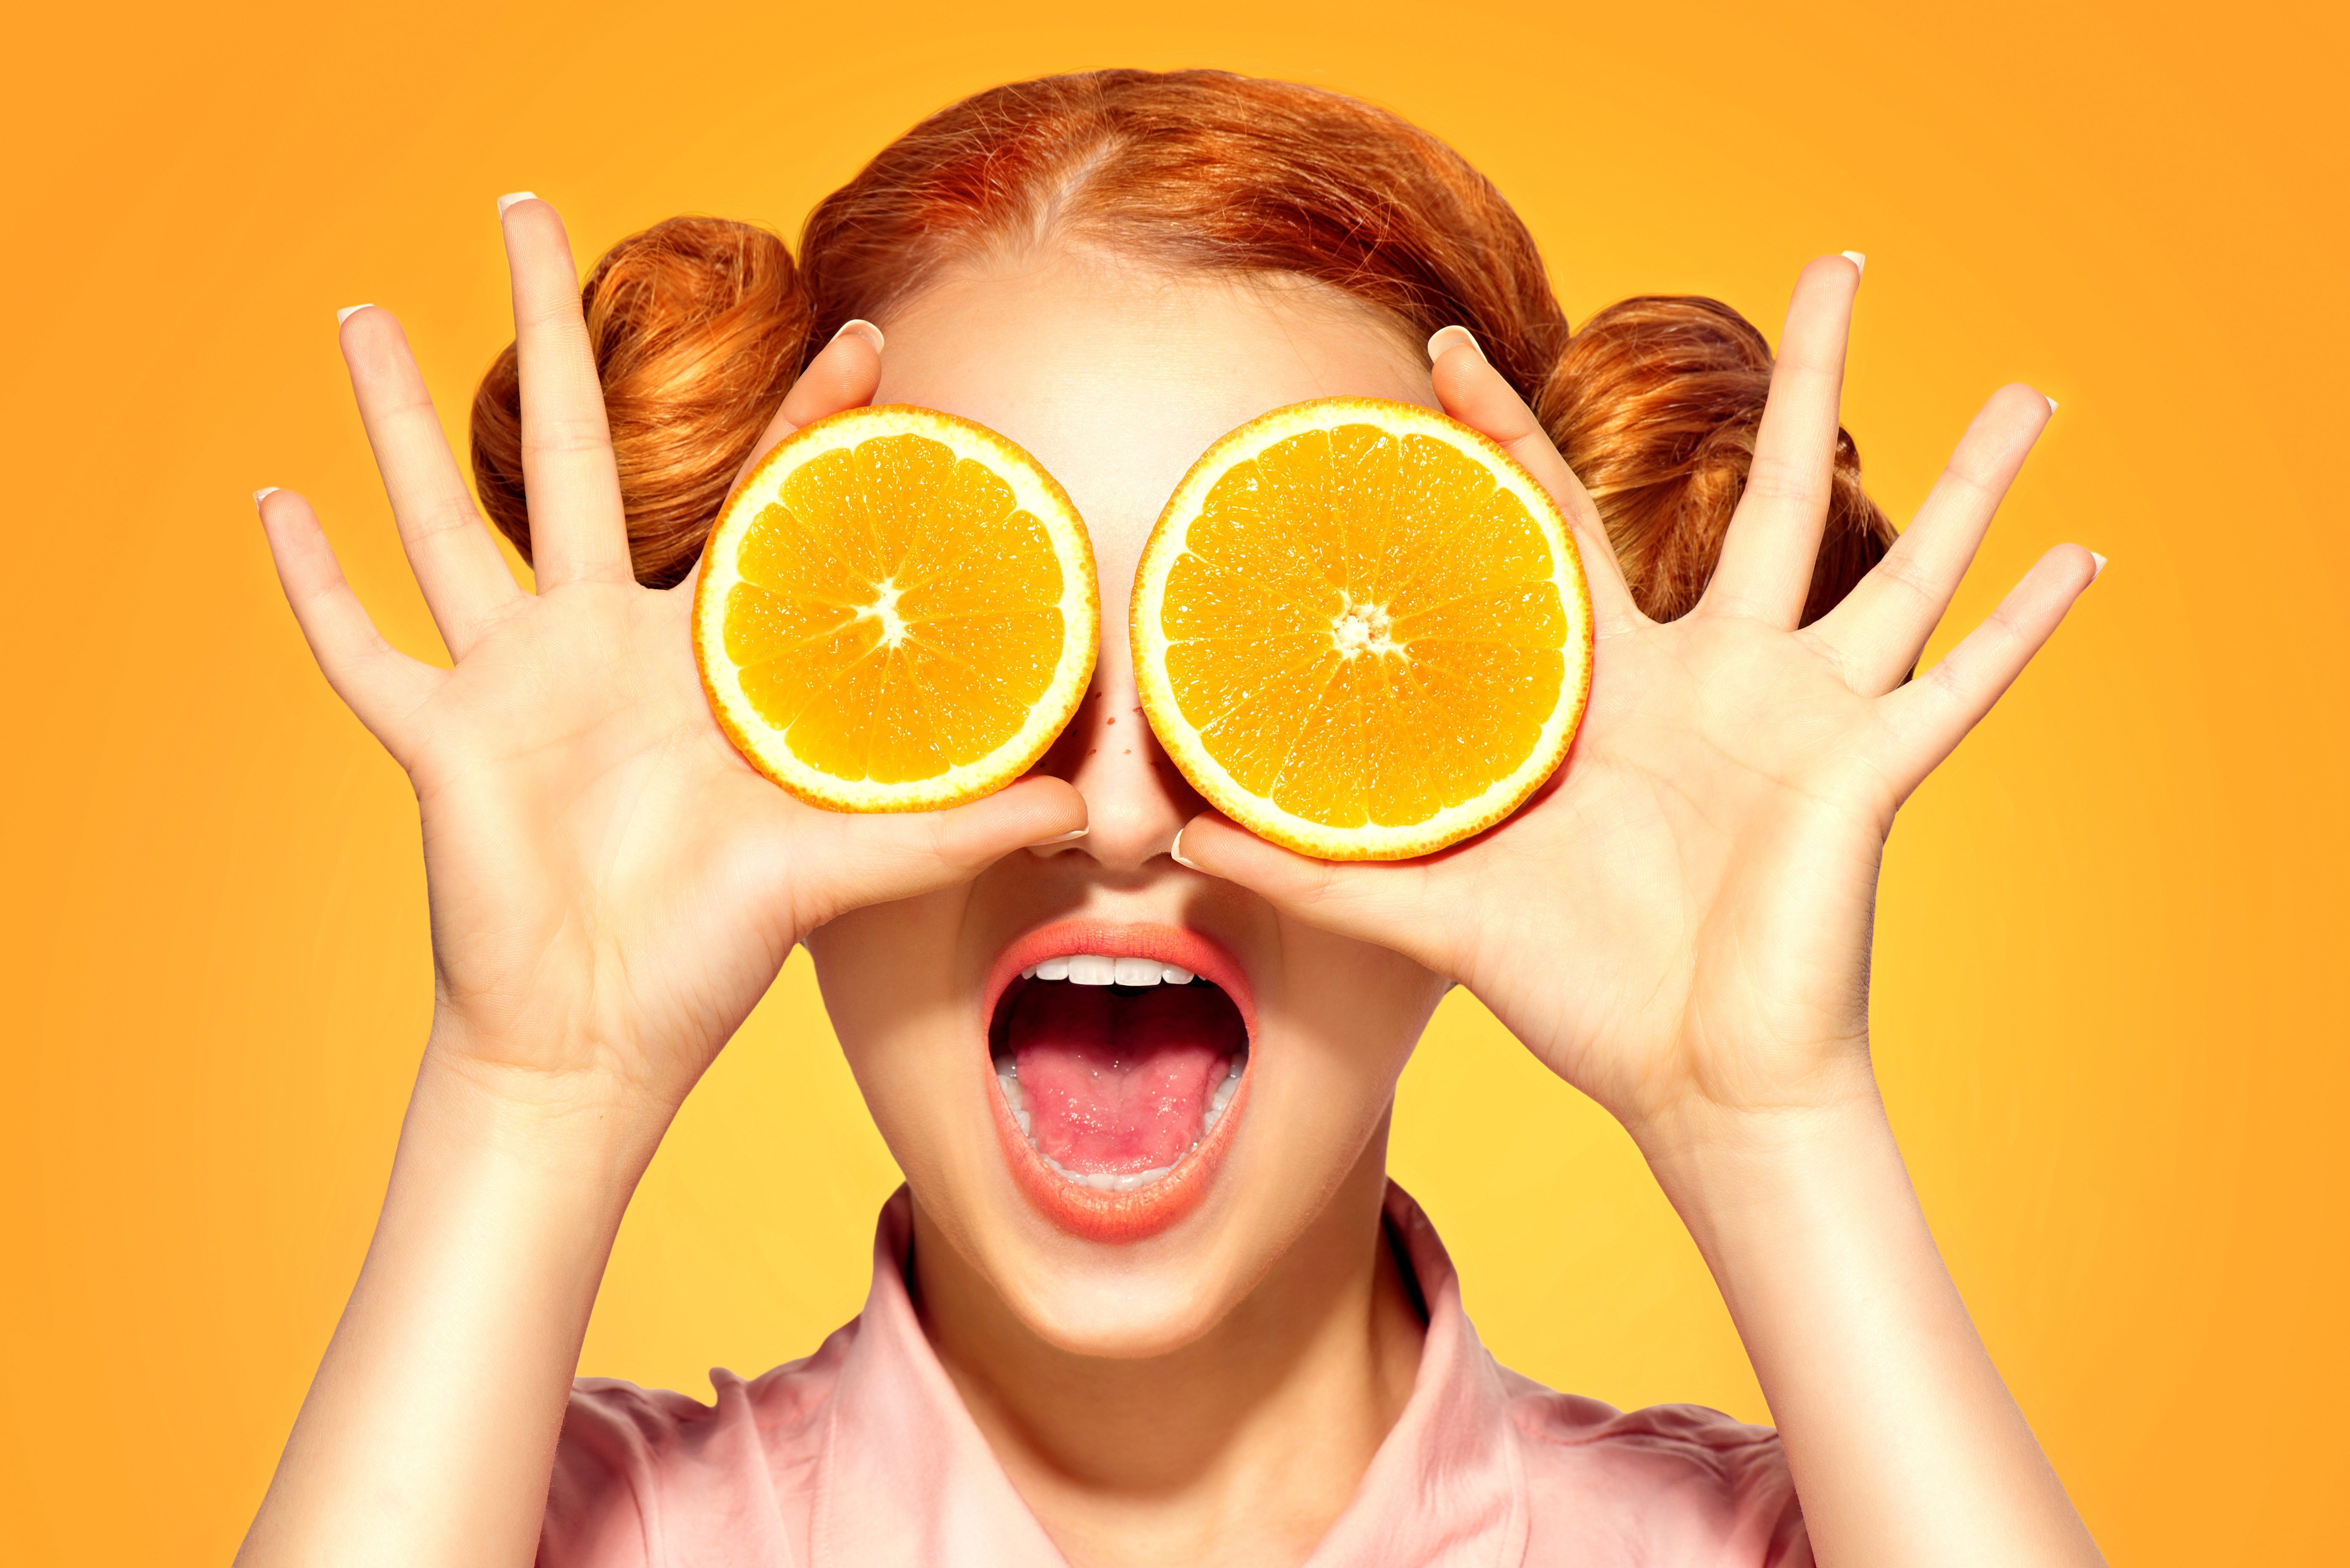 Beauty Model Girl takes Juicy Oranges. Beautiful Joyful teen girl with freckles, funny red hairstyle and yellow makeup. Professional make up. Holding Orange Slices and laughing, emotions